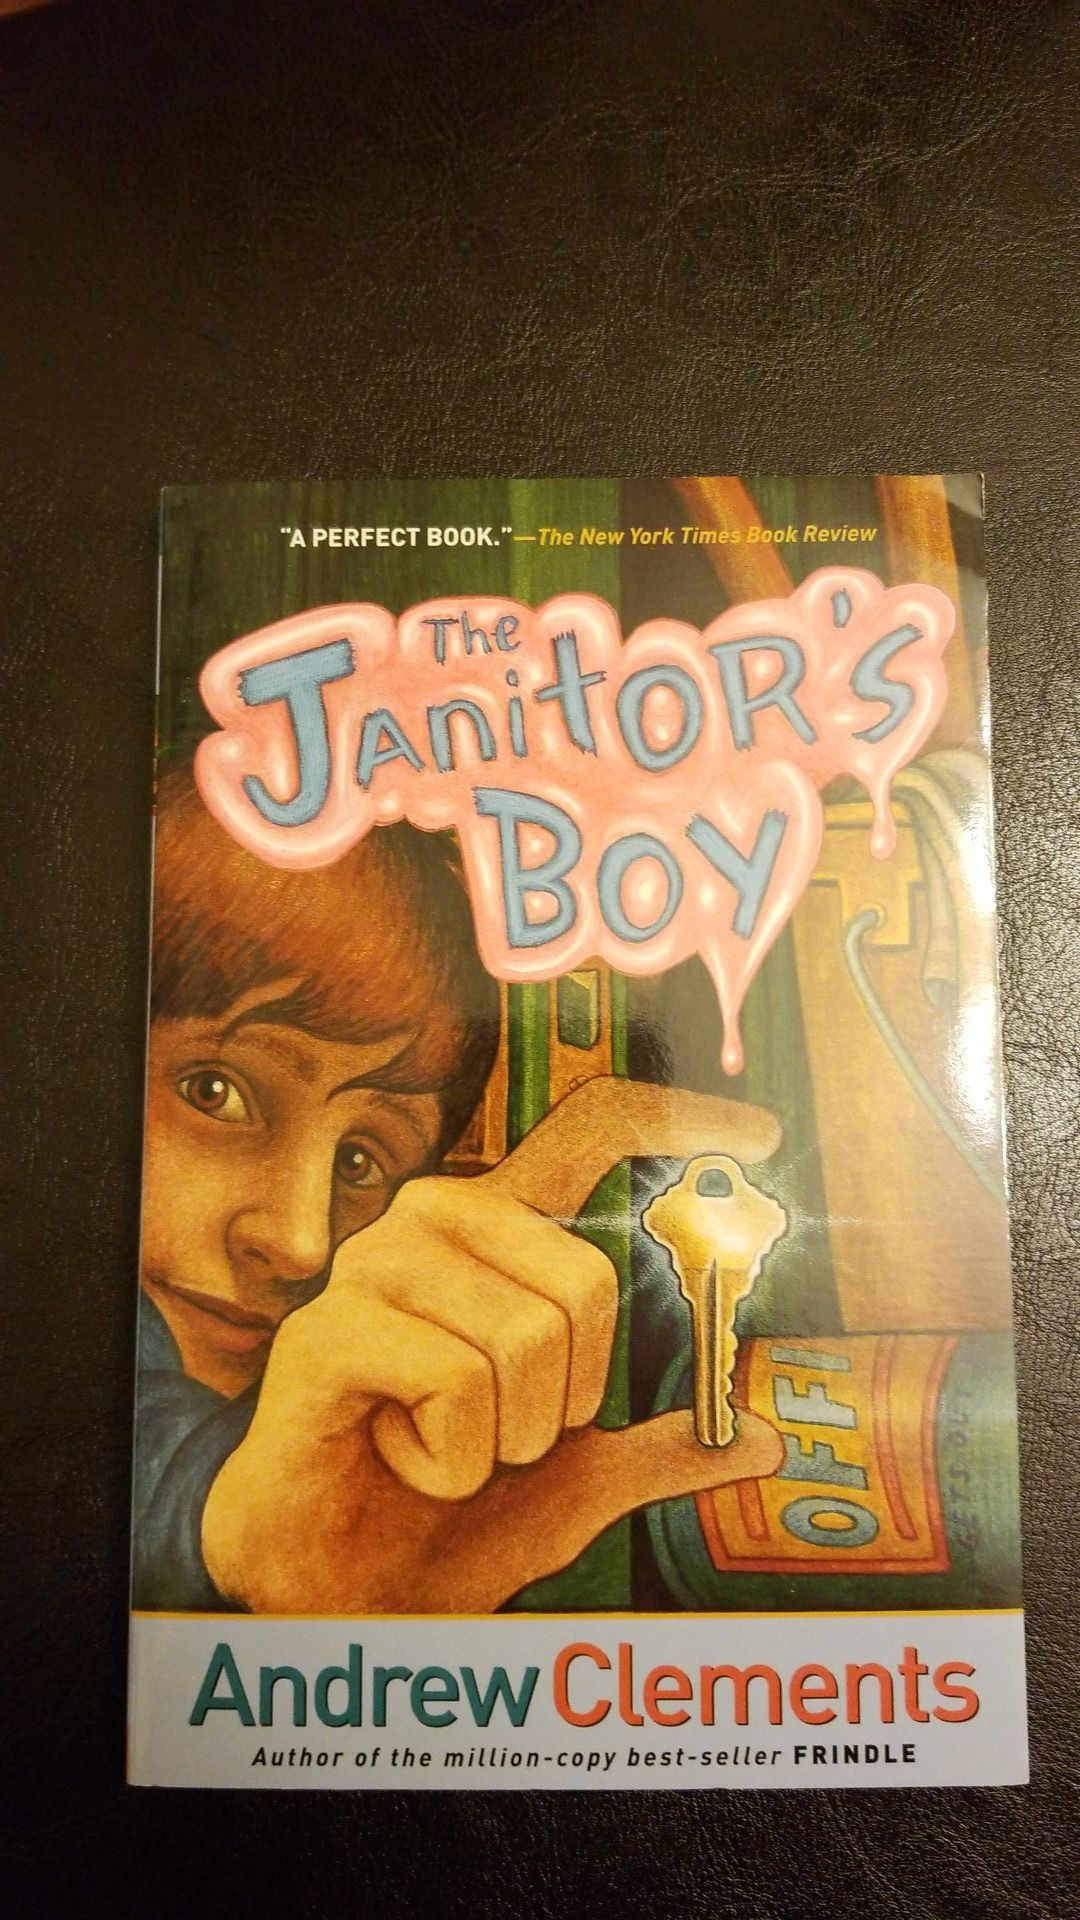 Janitor's Boy by Andrew Clements